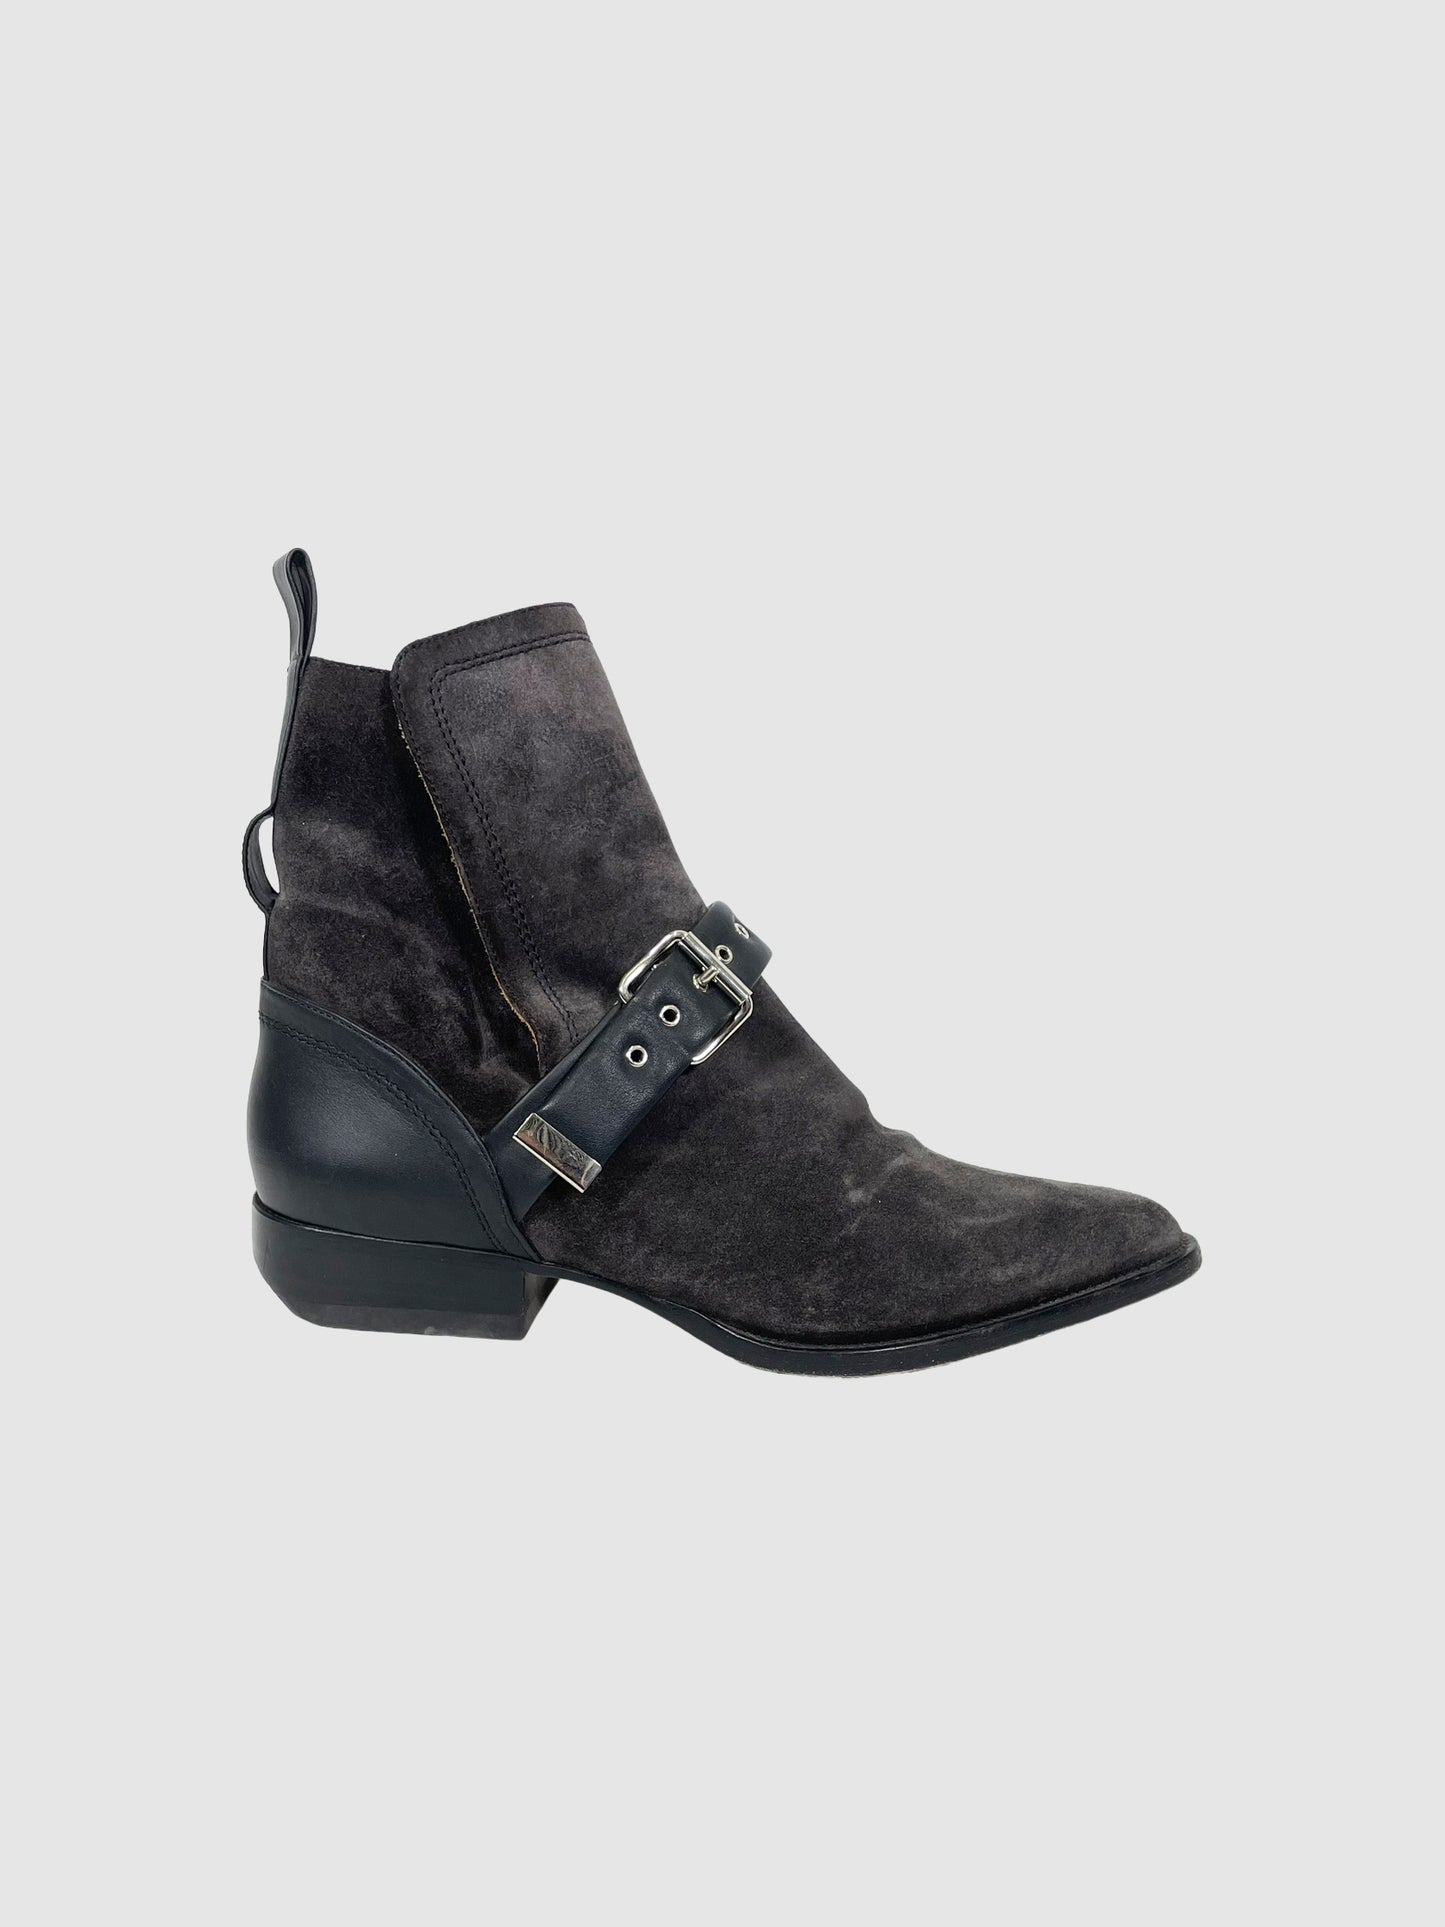 Chloé Suede Ankle Boots with Buckle - Size 40.5